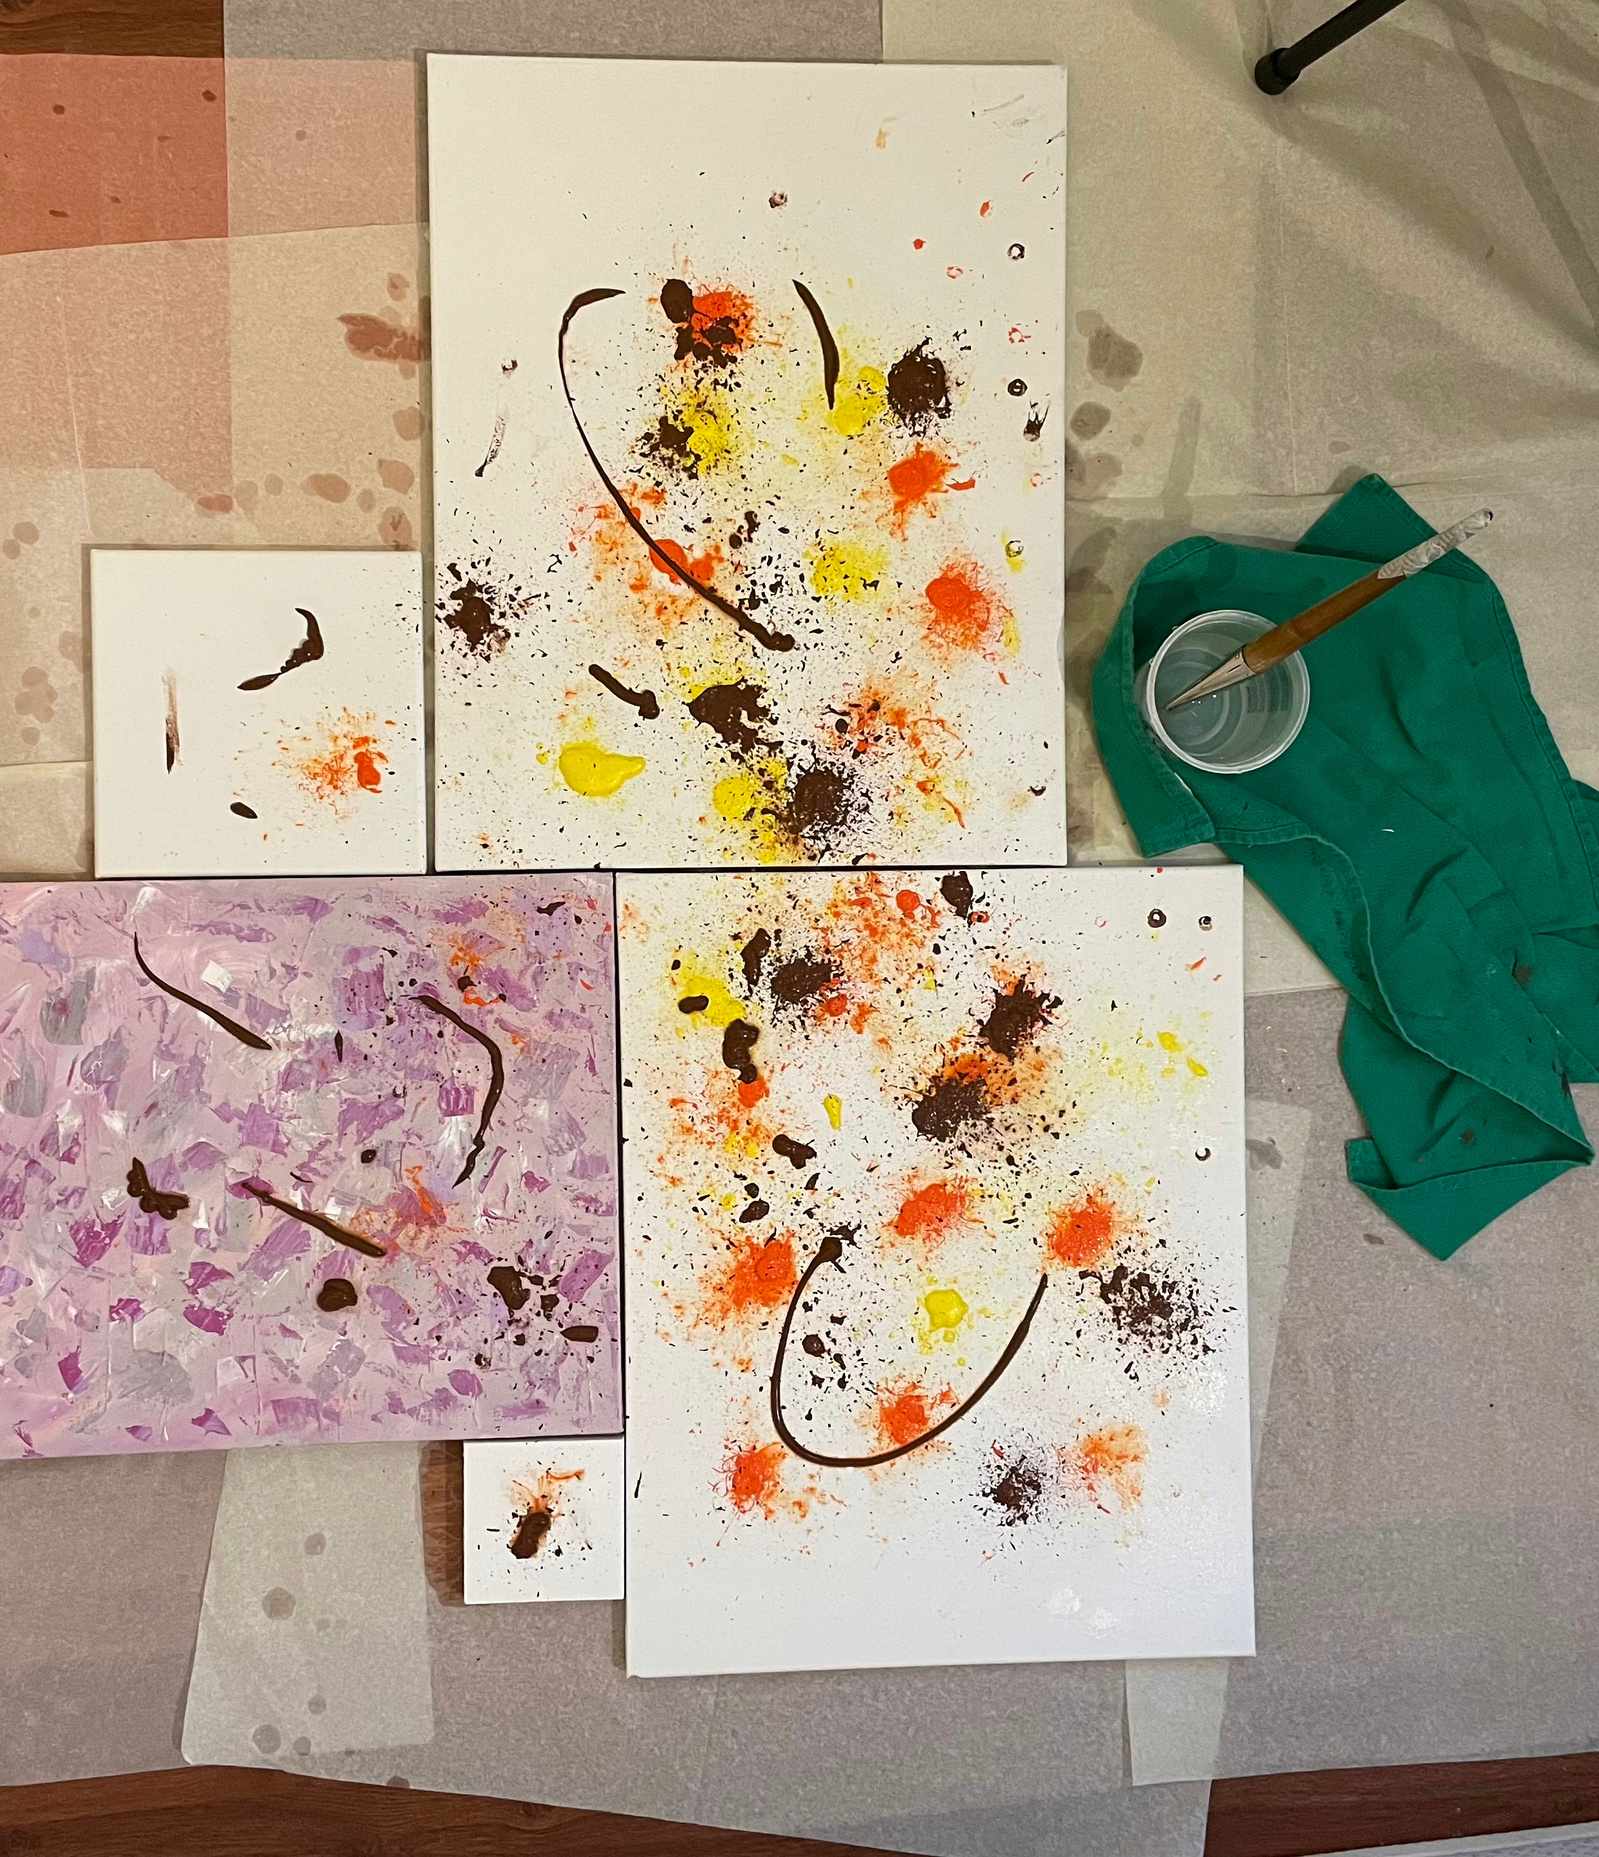 A collage of five stretched canvases on the floor along with a bowl of water, a painting brush and a rag on the right hand side.